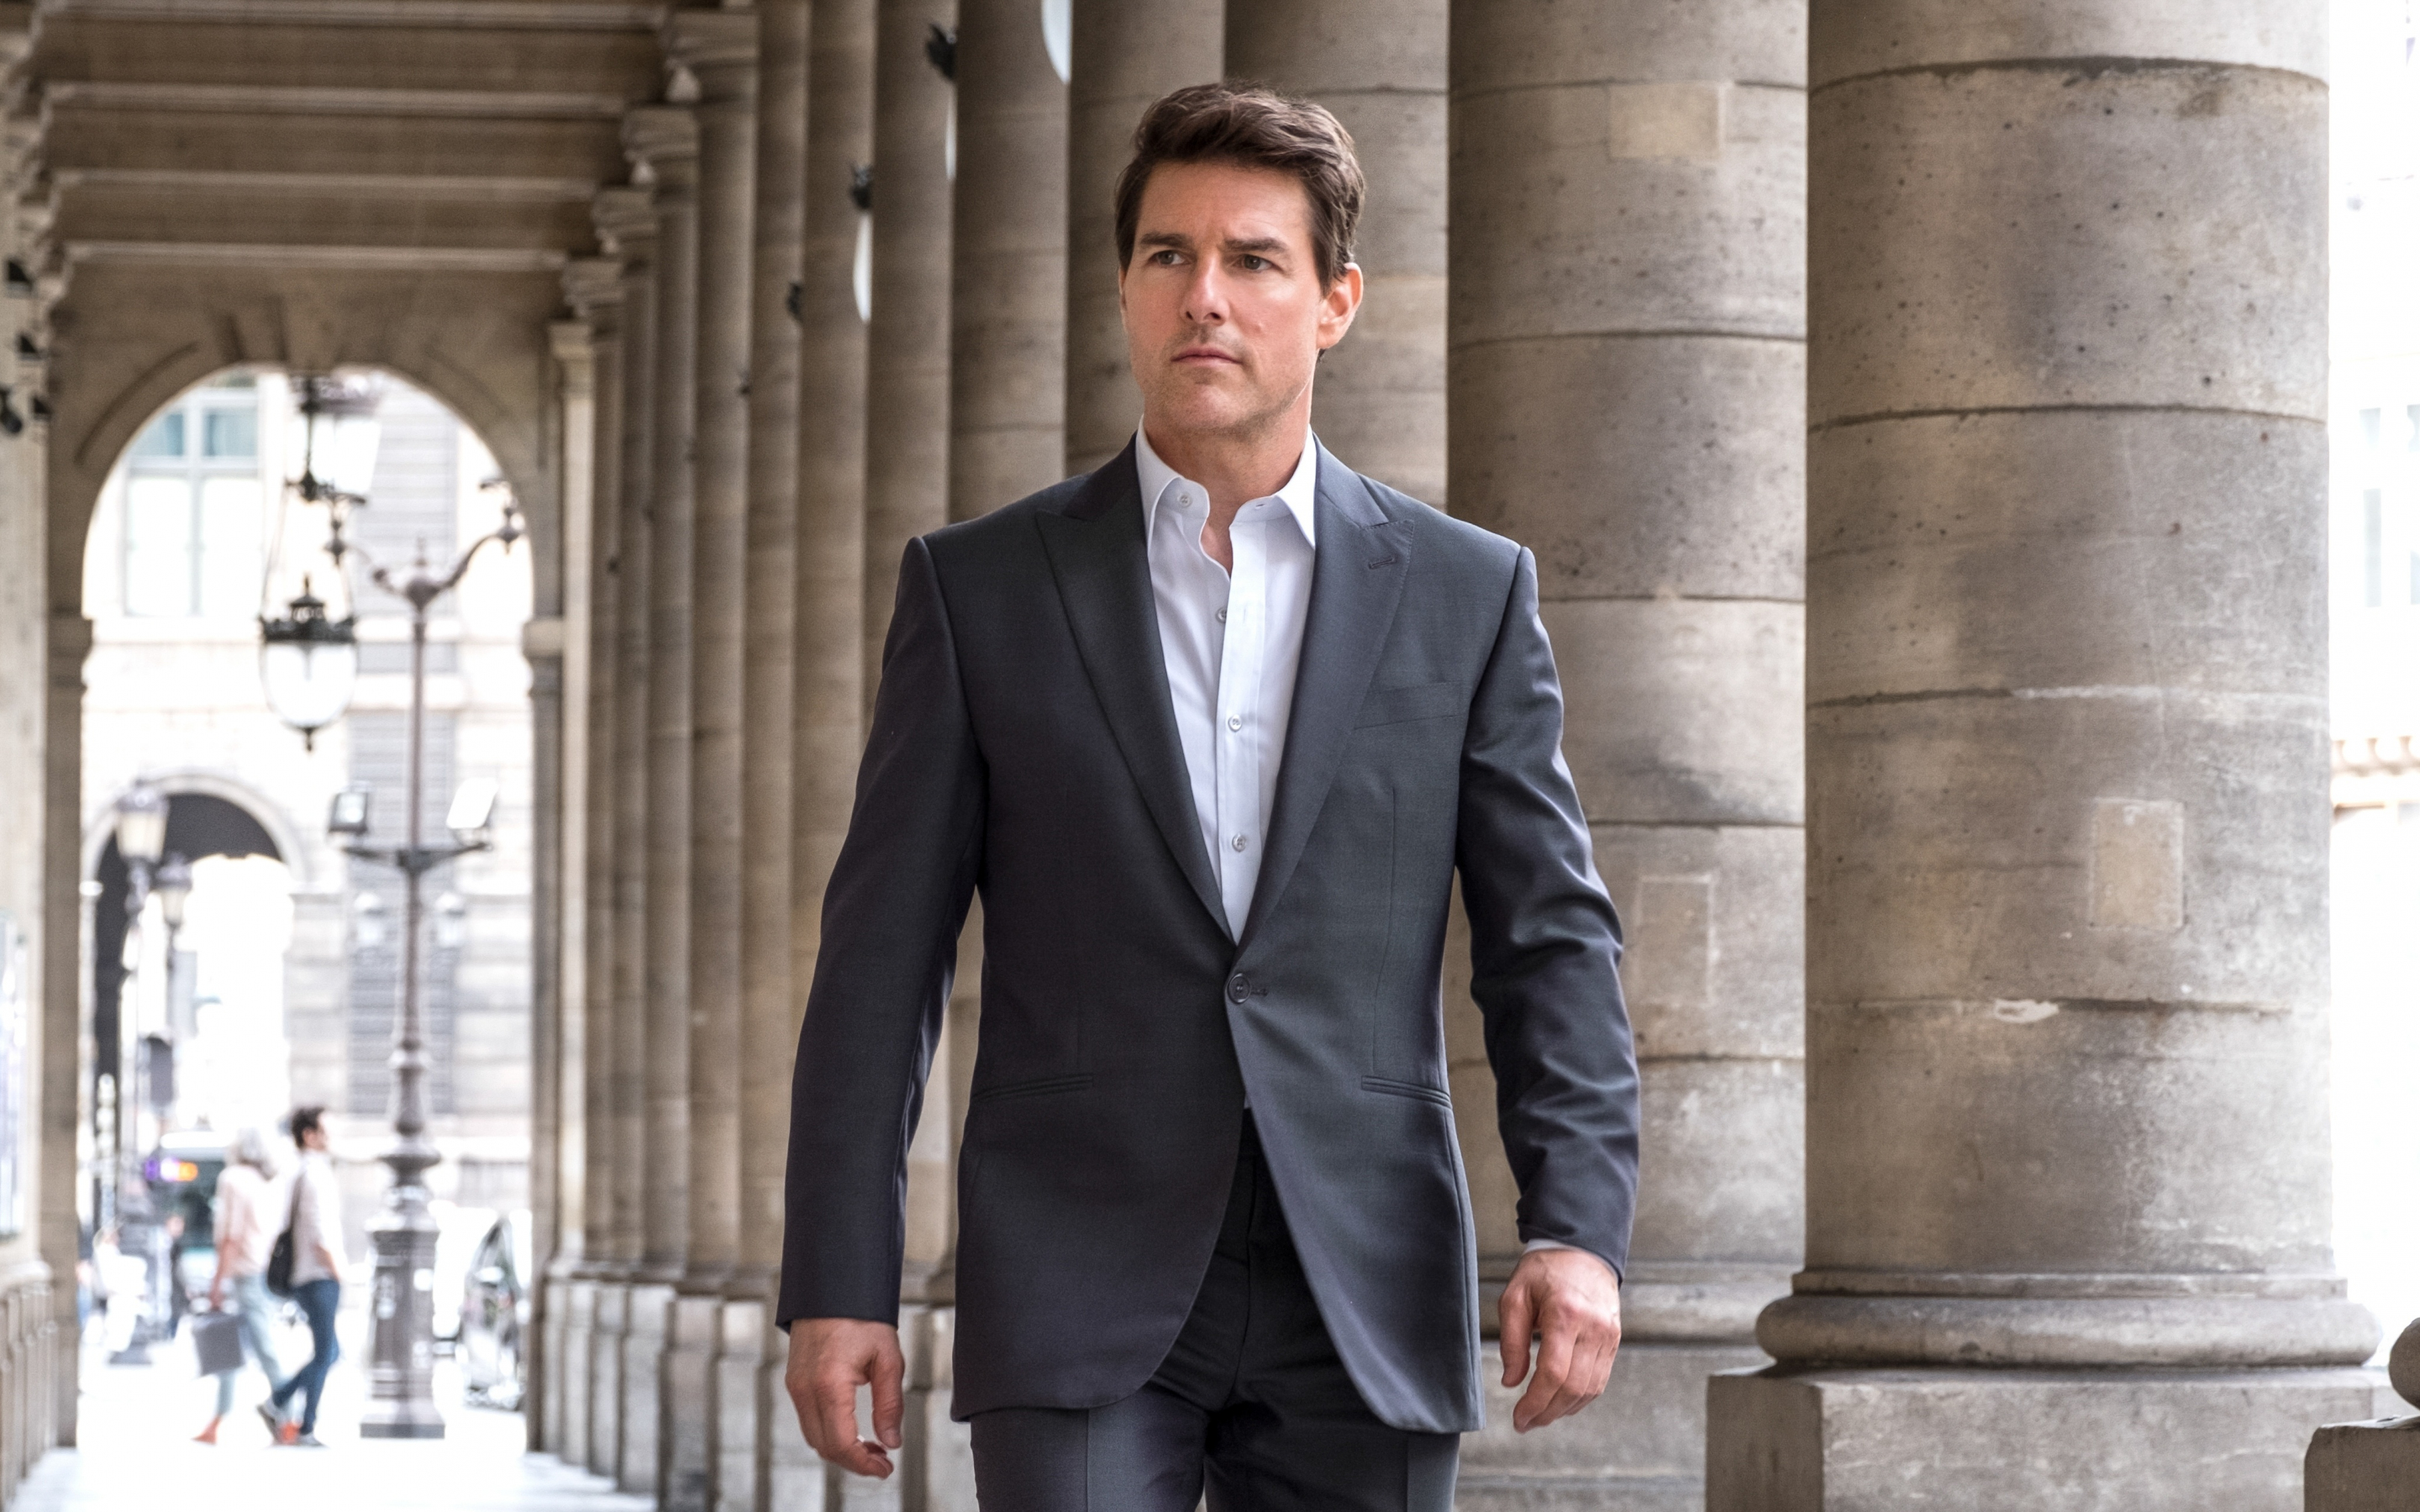 Handsome, Tom Cruise, movie, Mission: Impossible – Fallout, 2880x1800 wallpaper